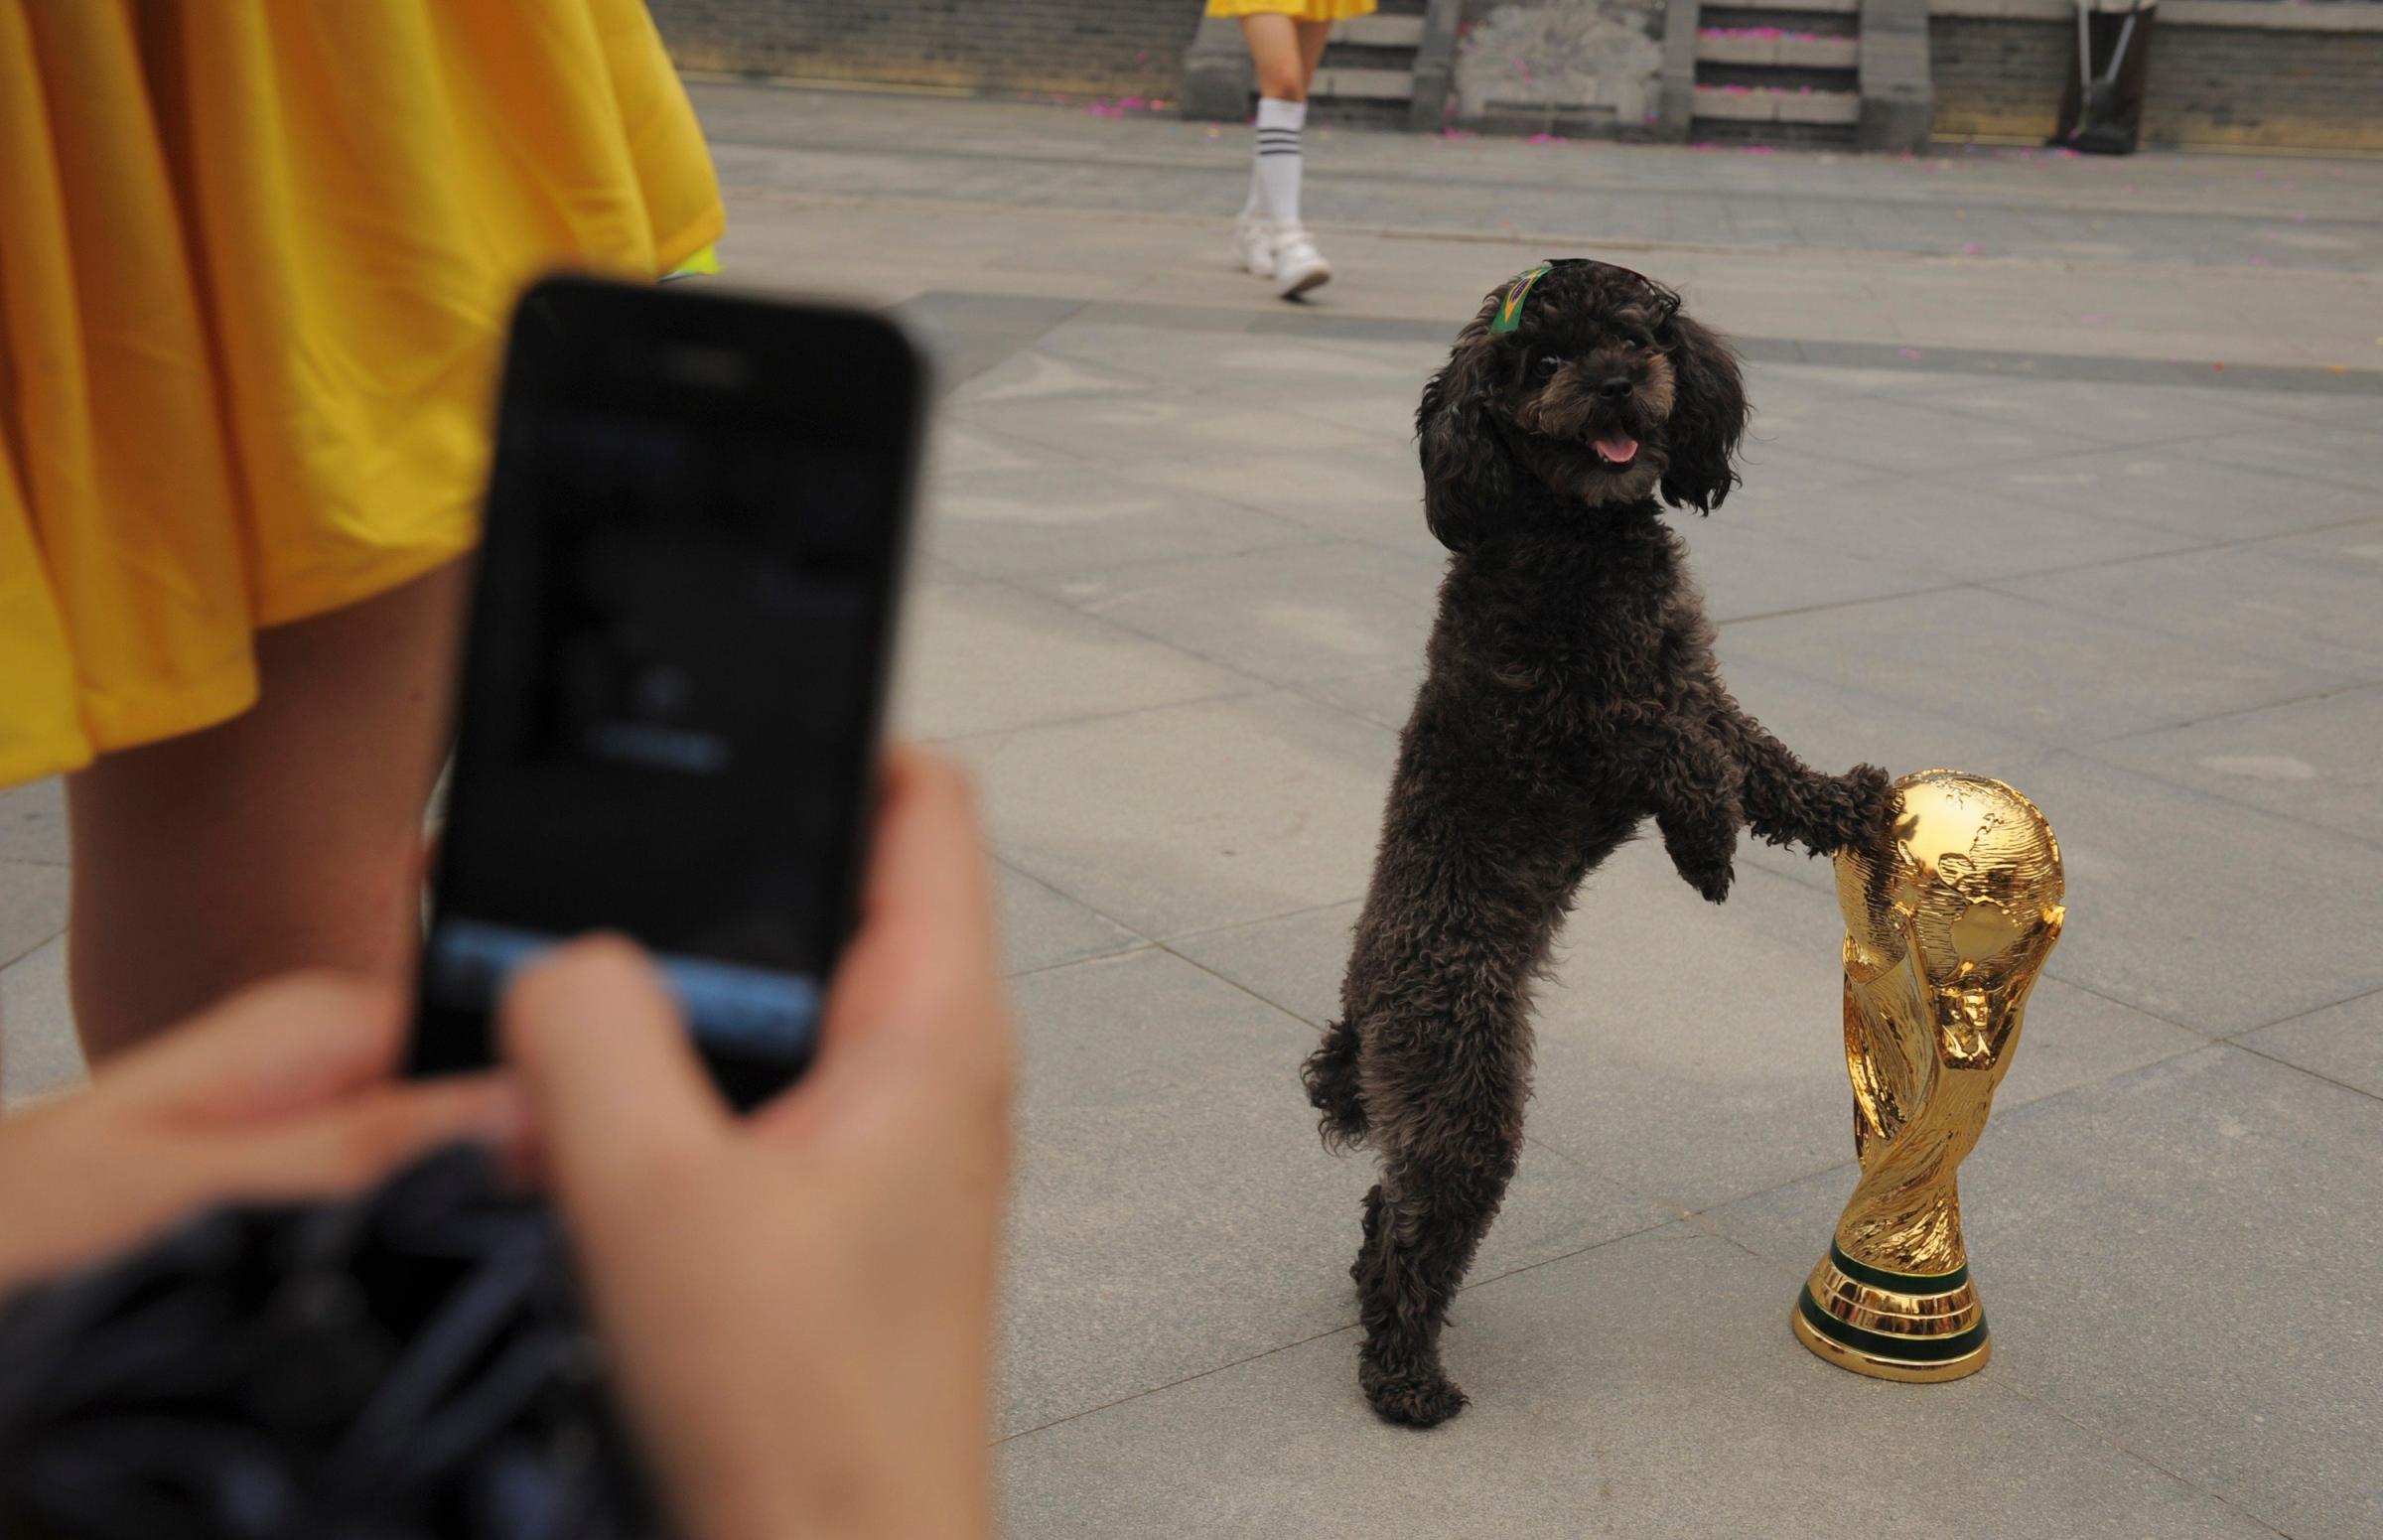 A dog with a Brazilian flag sticker on its head, touches a replica of the World Cup trophy as a visitor takes pictures during an event to celebrate the upcoming 2014 World Cup in Brazil, in Wuhan